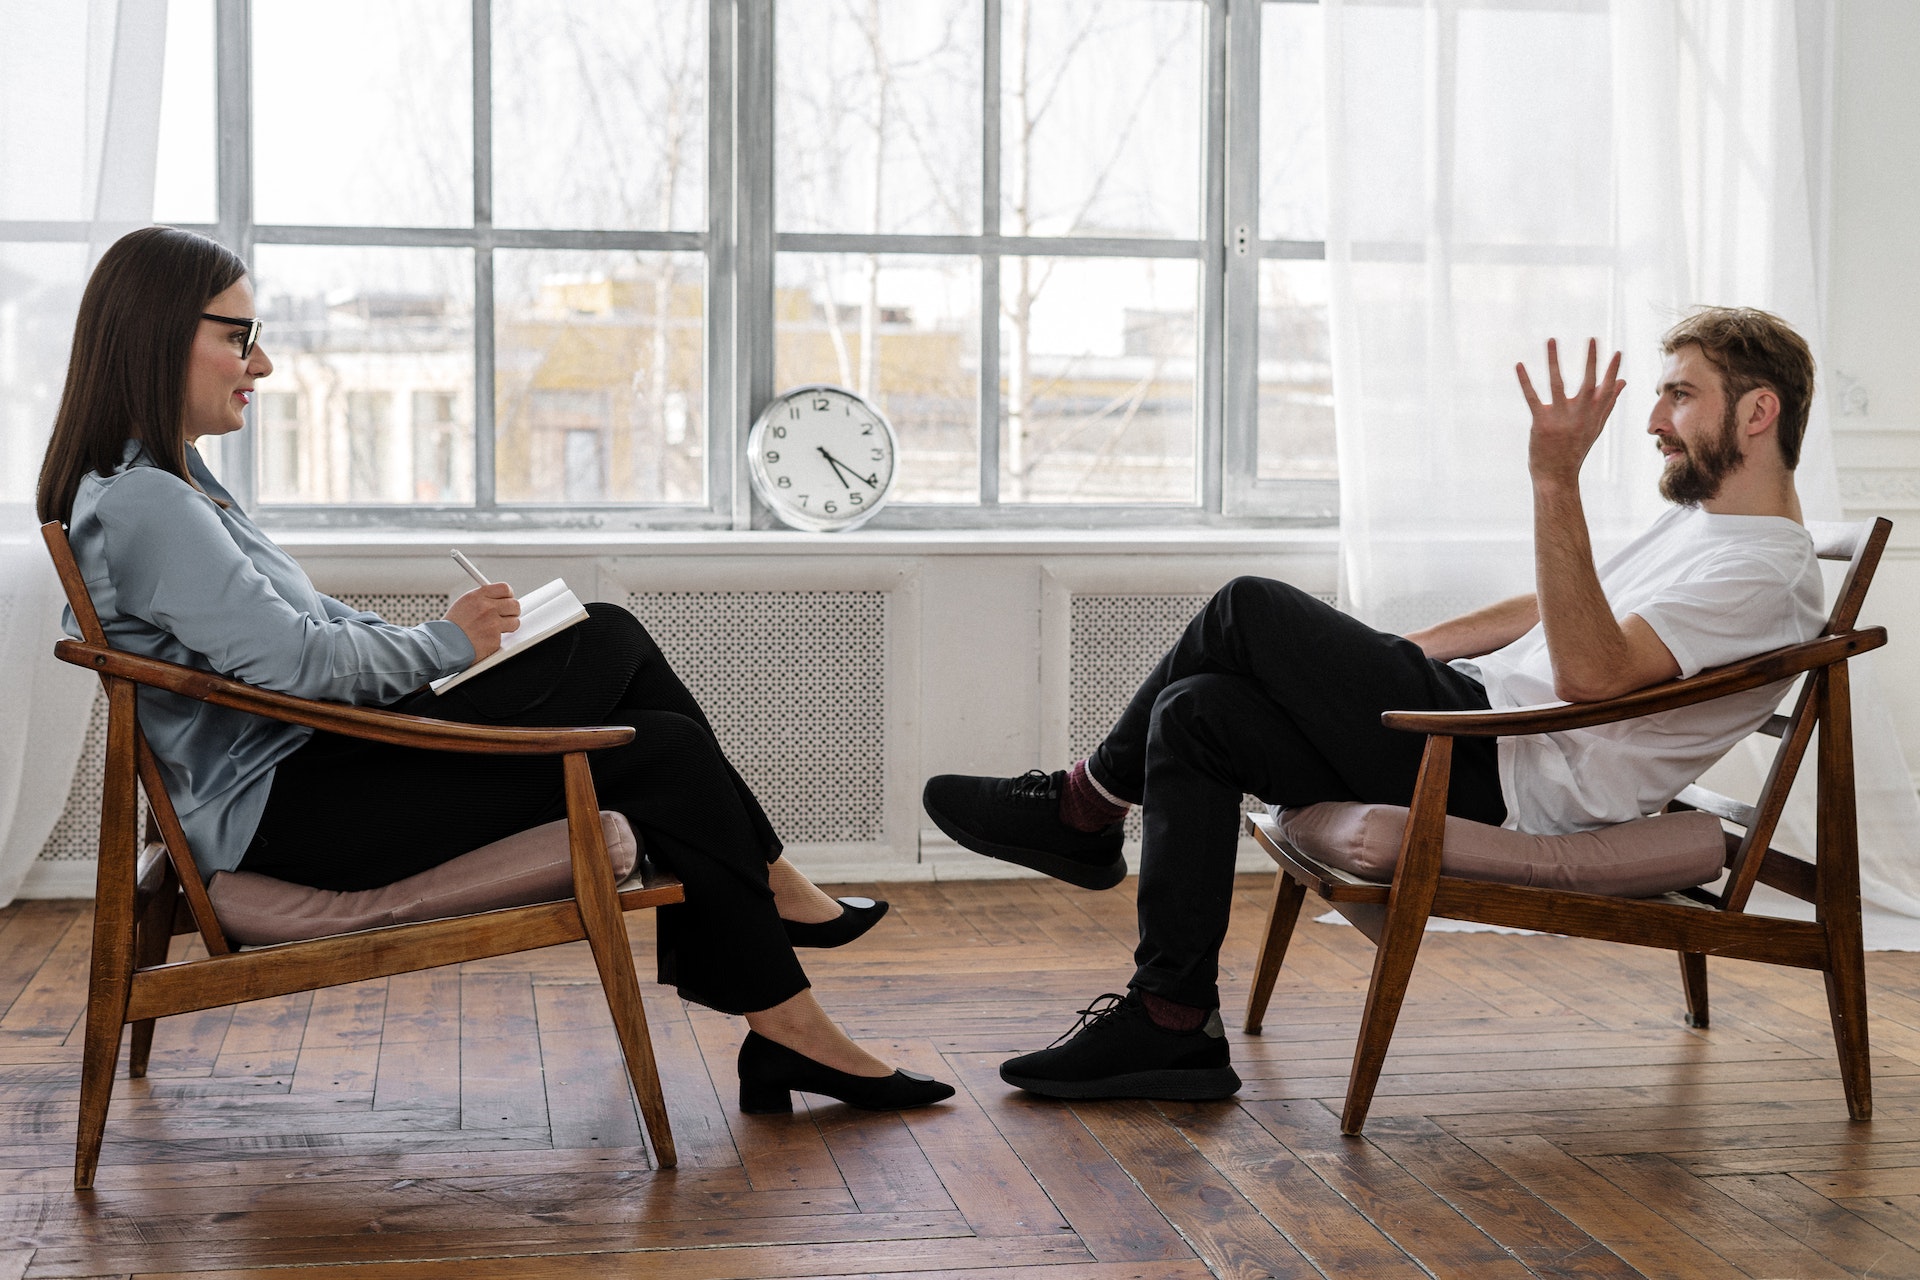 Two people sitting in chairs and talking